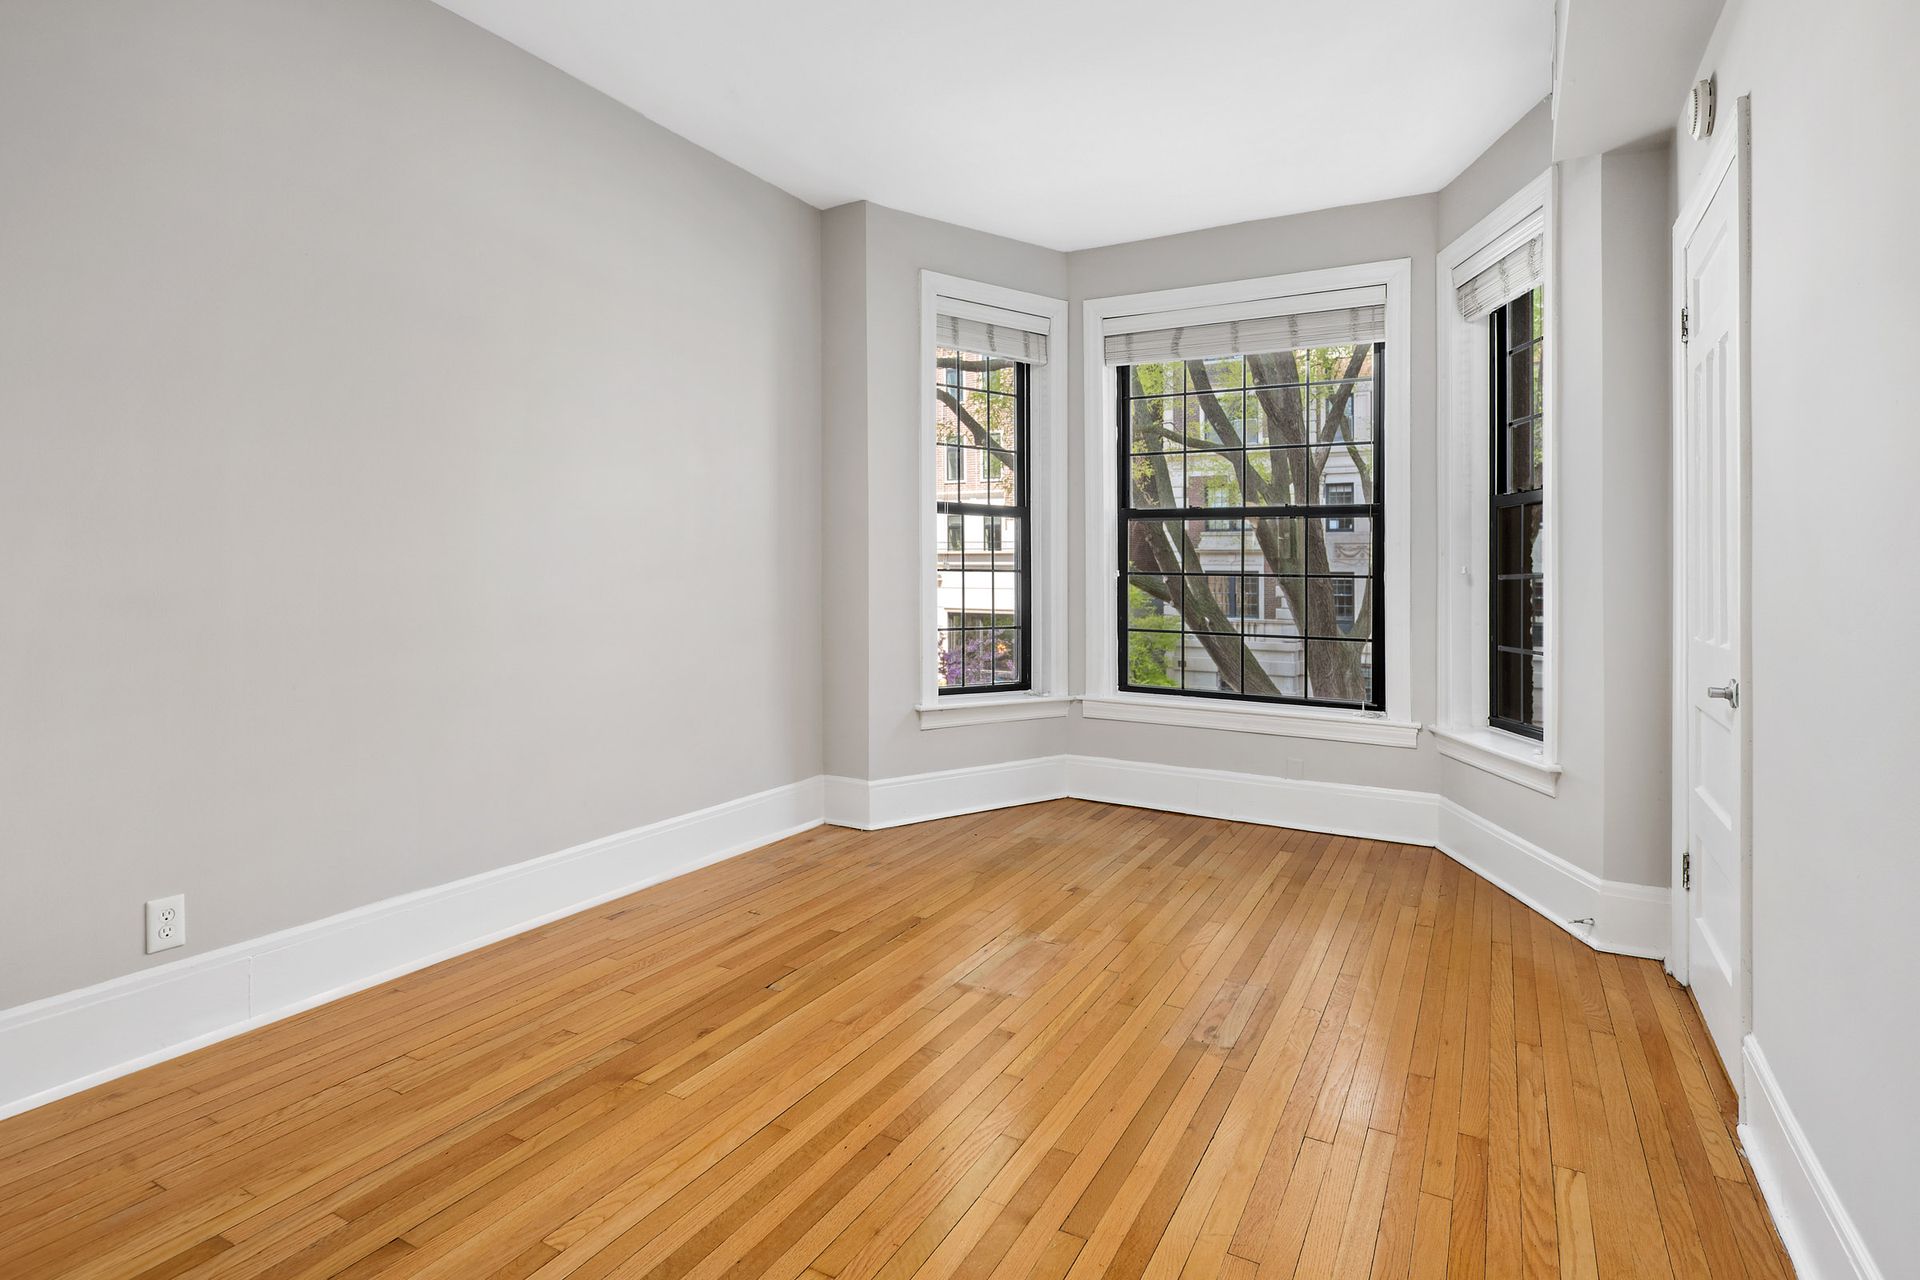 An empty room with hardwood floors and two windows at 429 W Melrose Street.